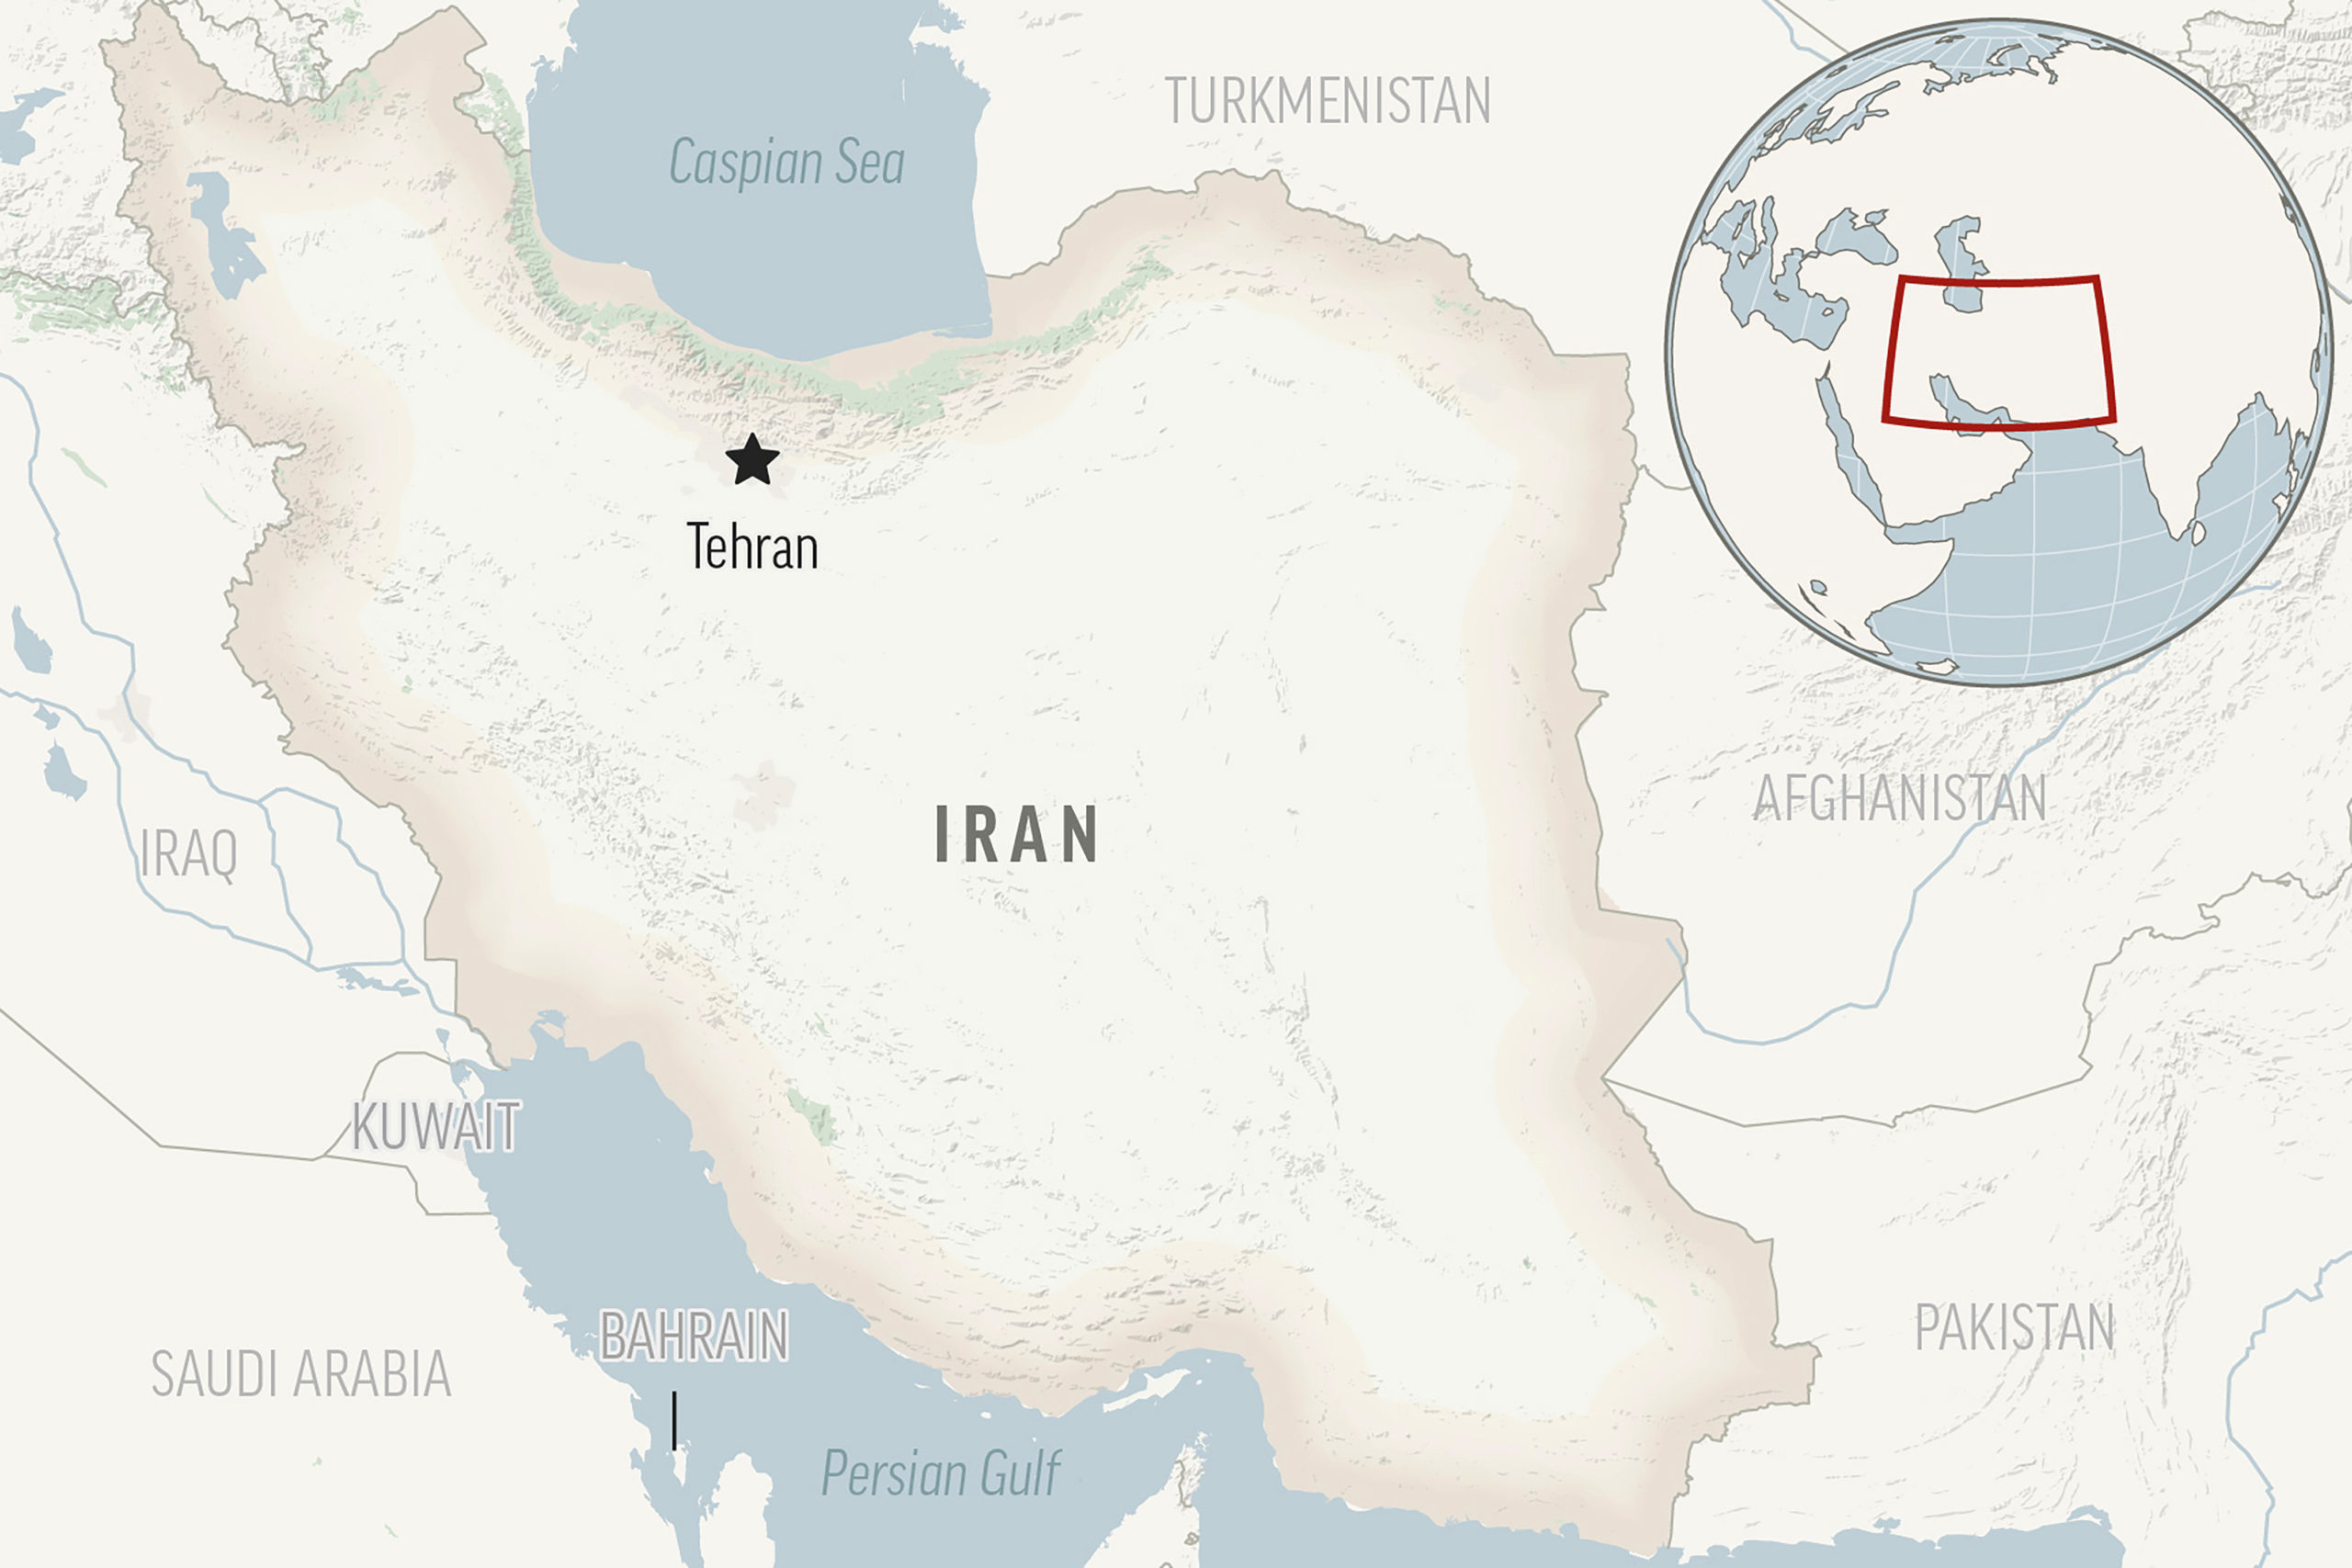 A locator map shows the country of Iran and its capital Tehran.